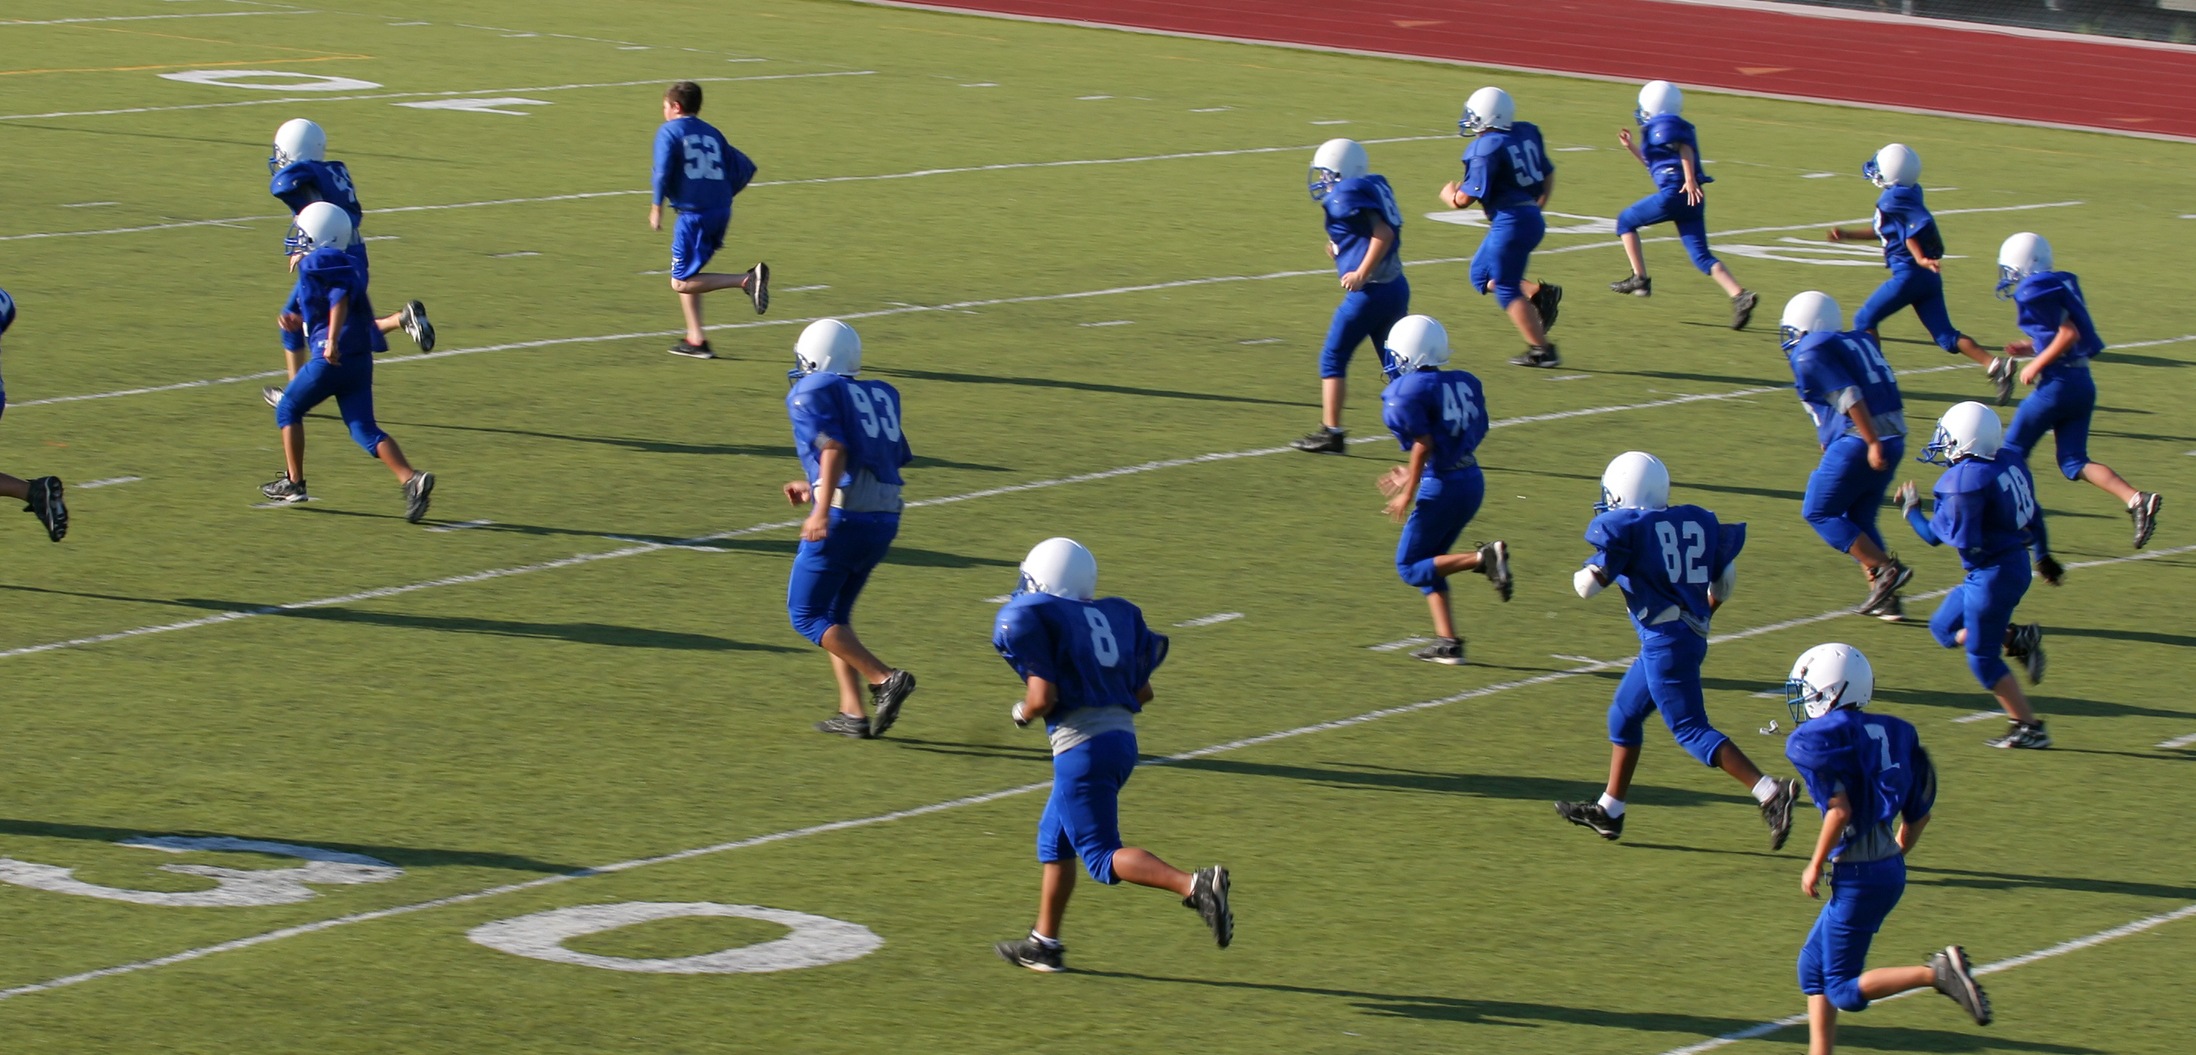 Football players on a field